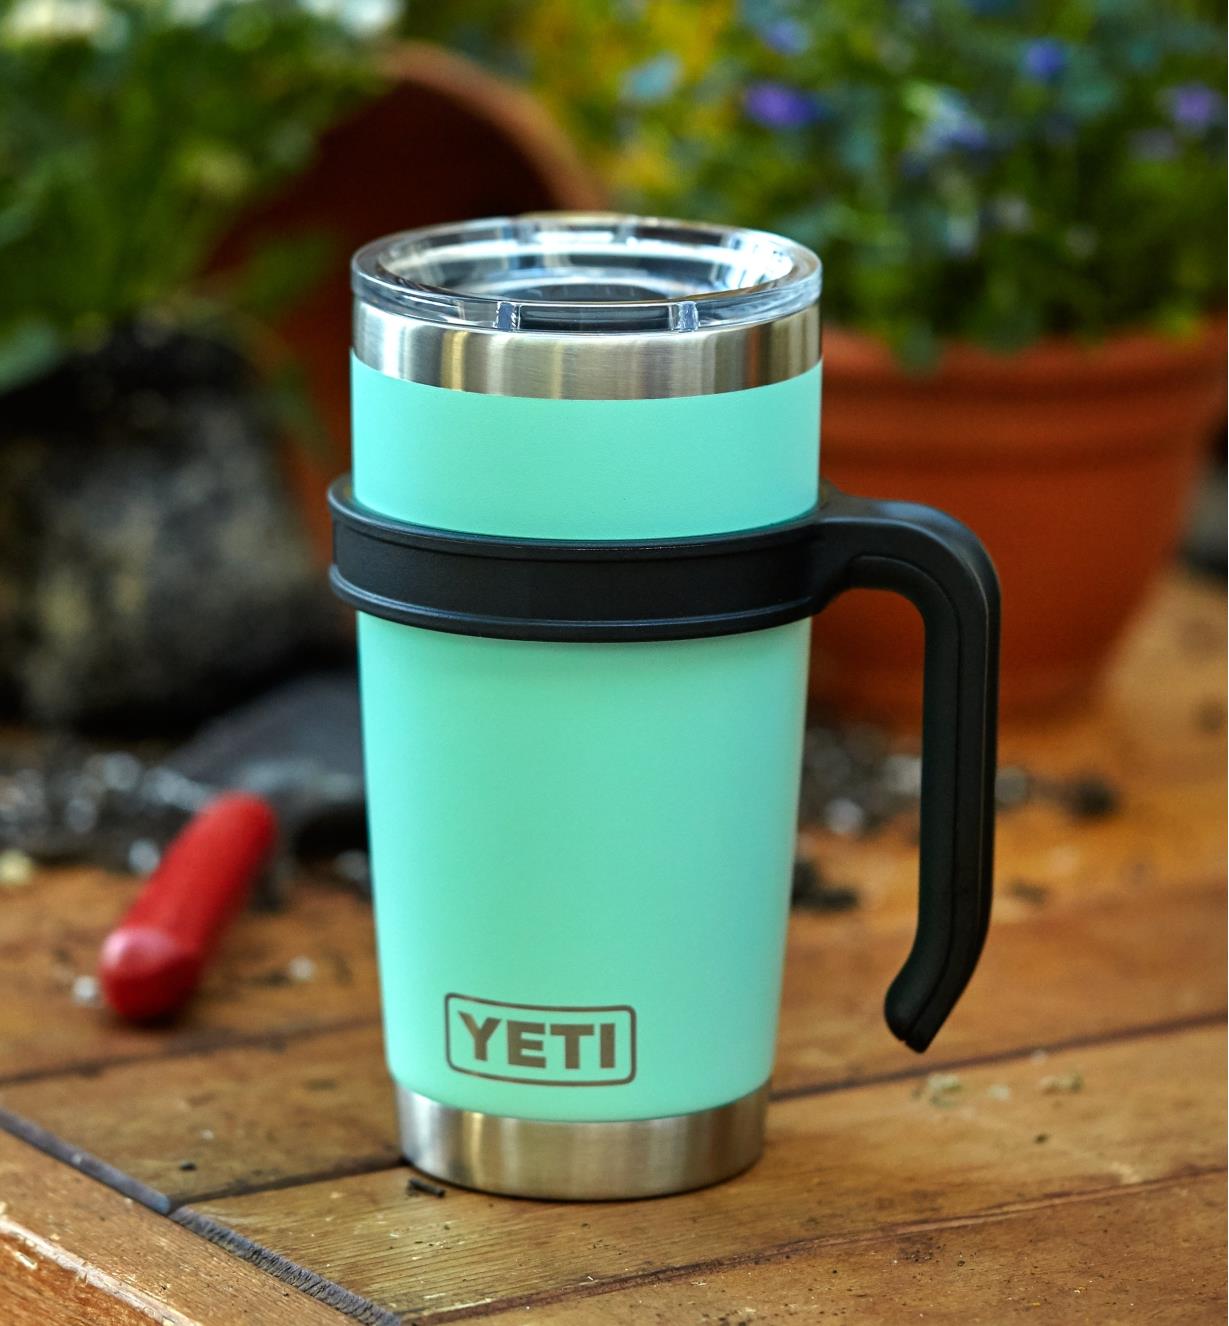 paracord yeti cup handle